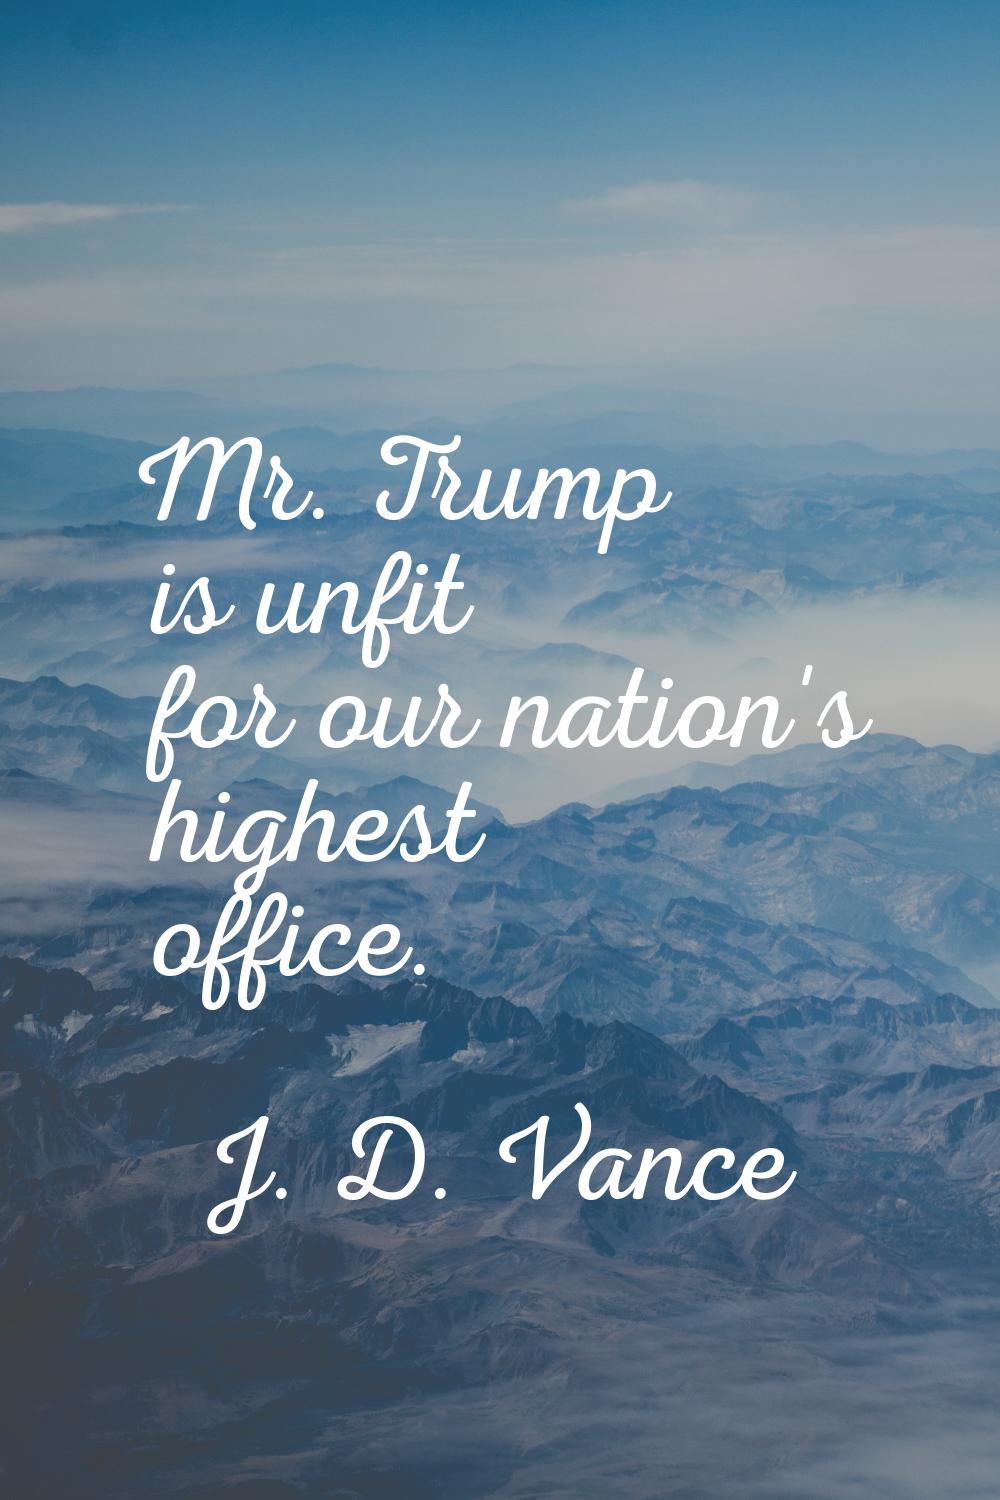 Mr. Trump is unfit for our nation's highest office.